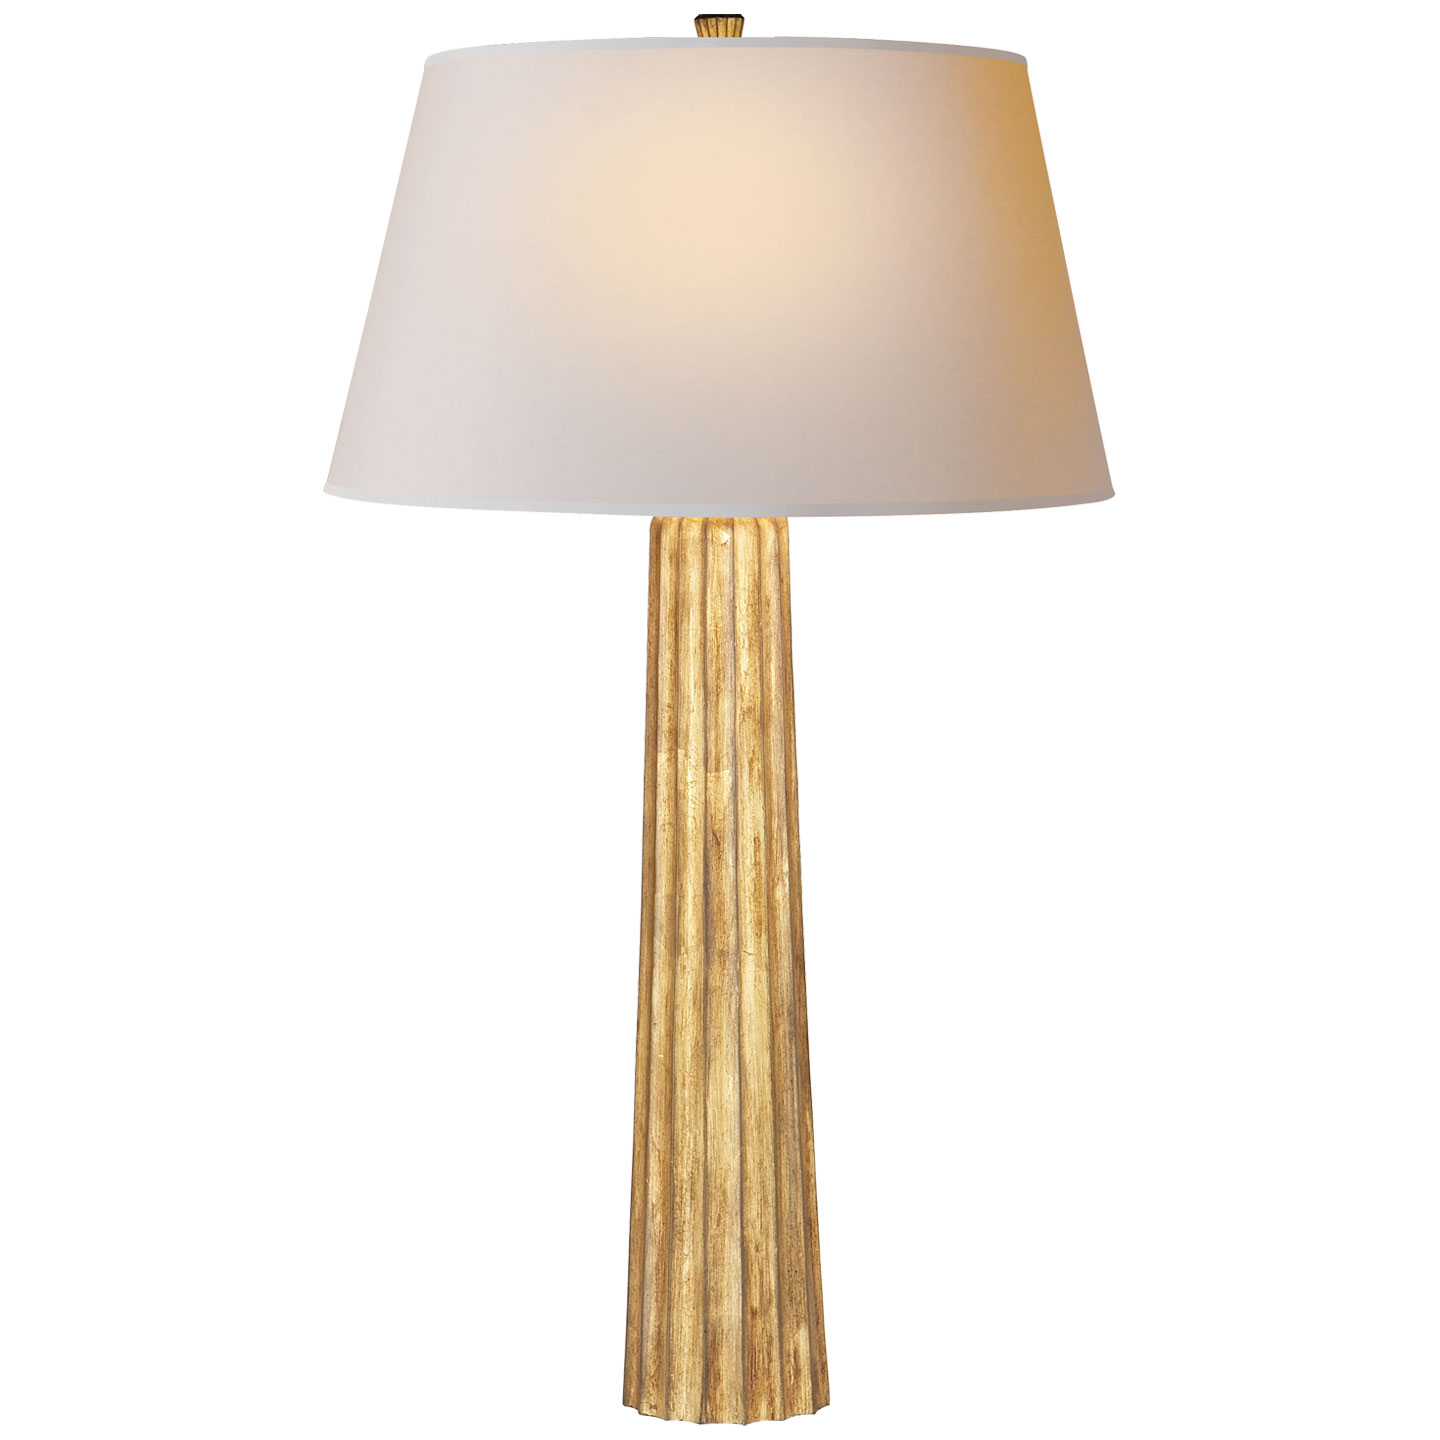 Large Fluted Spire Lamp